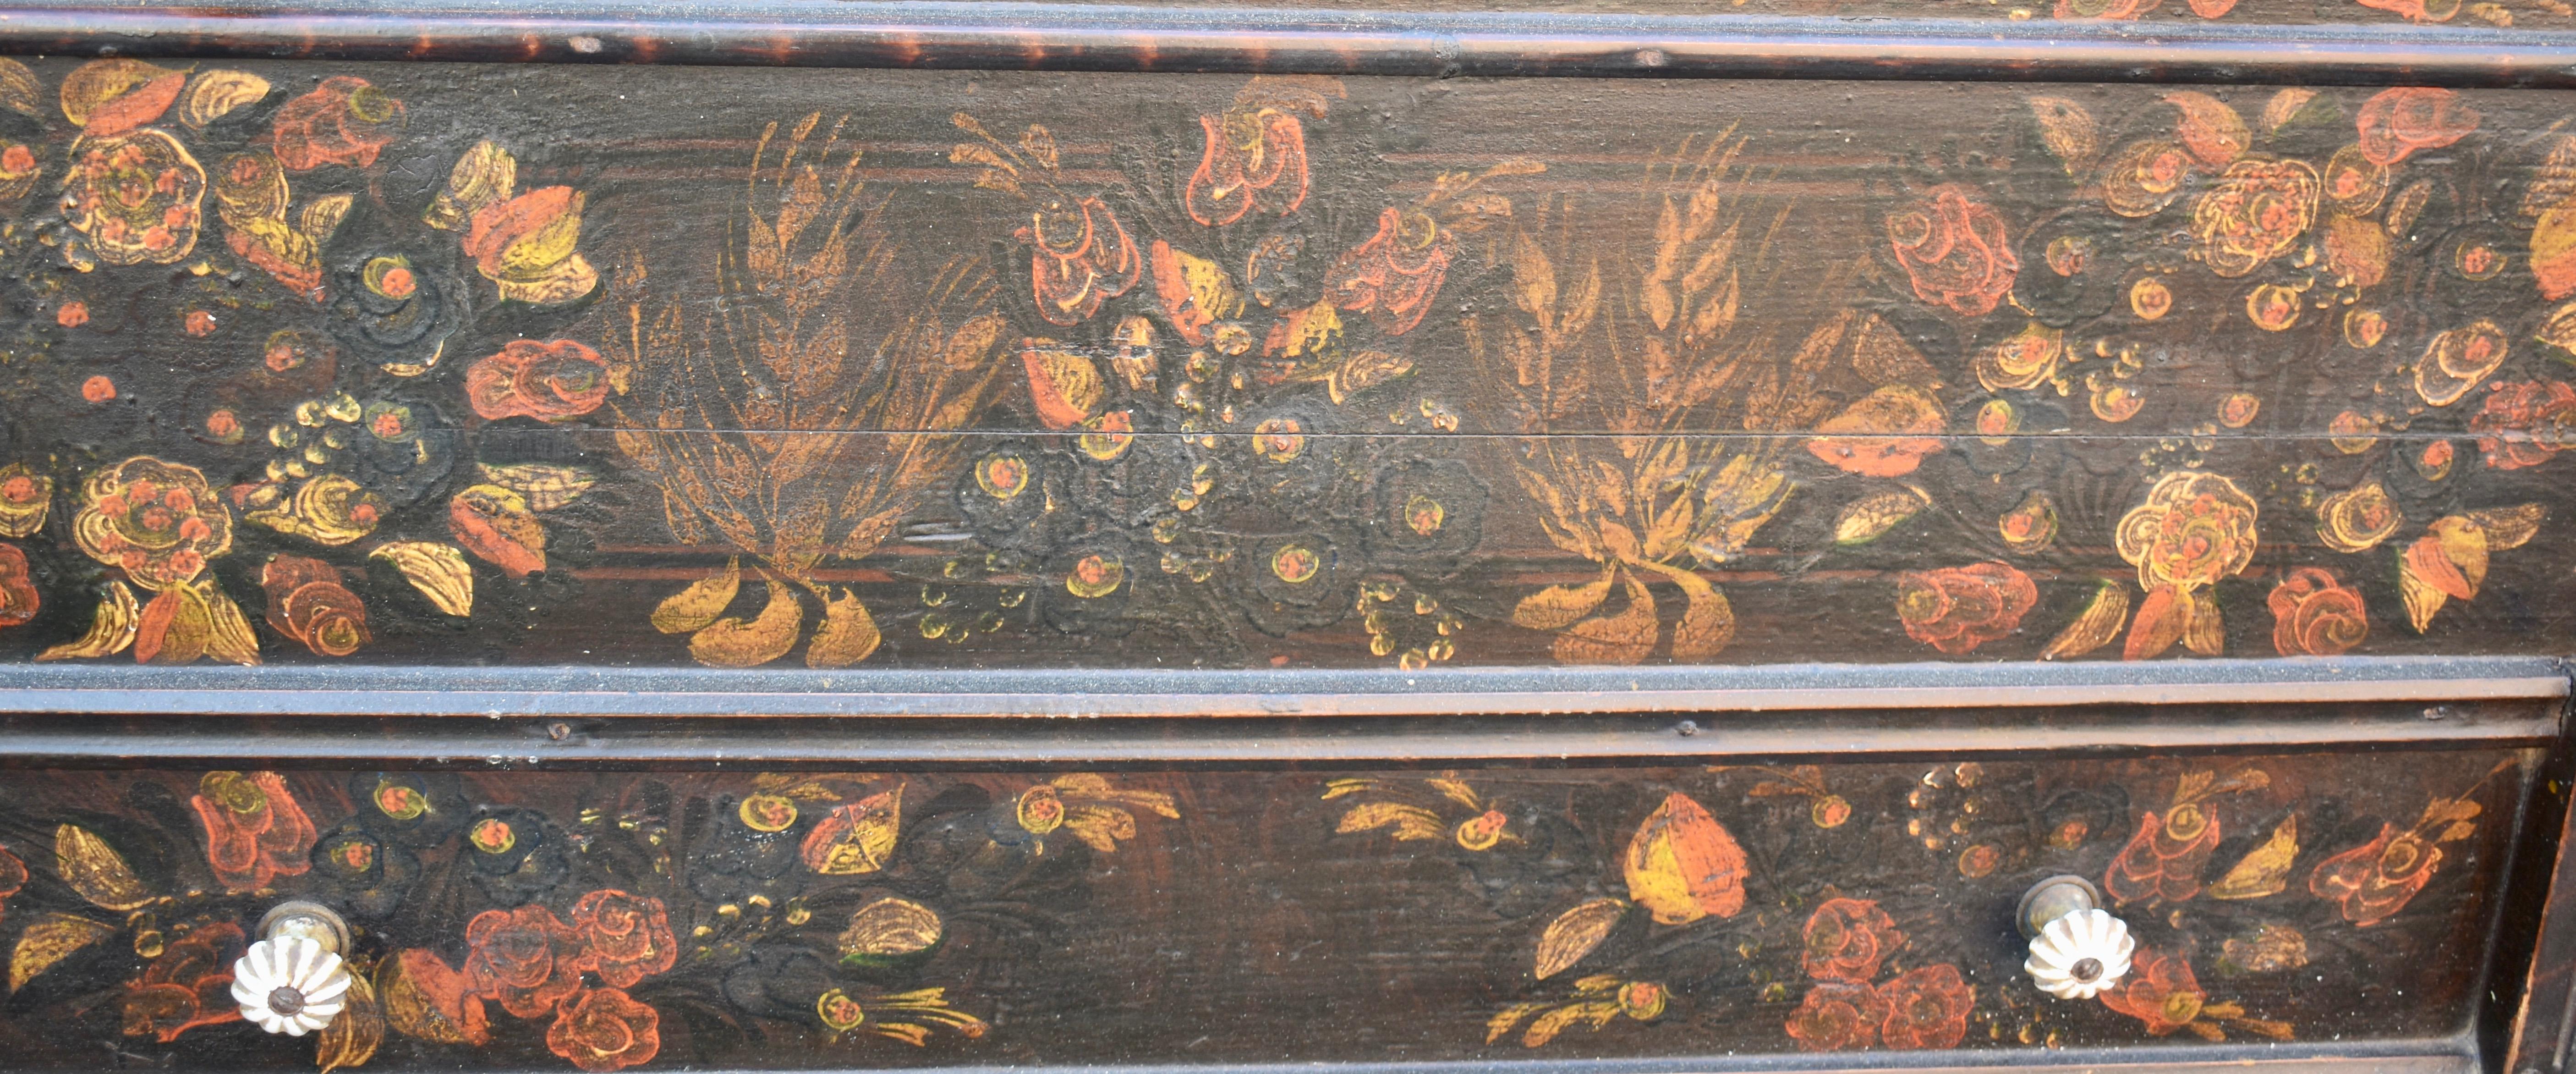 Pine Trunk or Blanket Chest in Original Decorative Paint For Sale 8